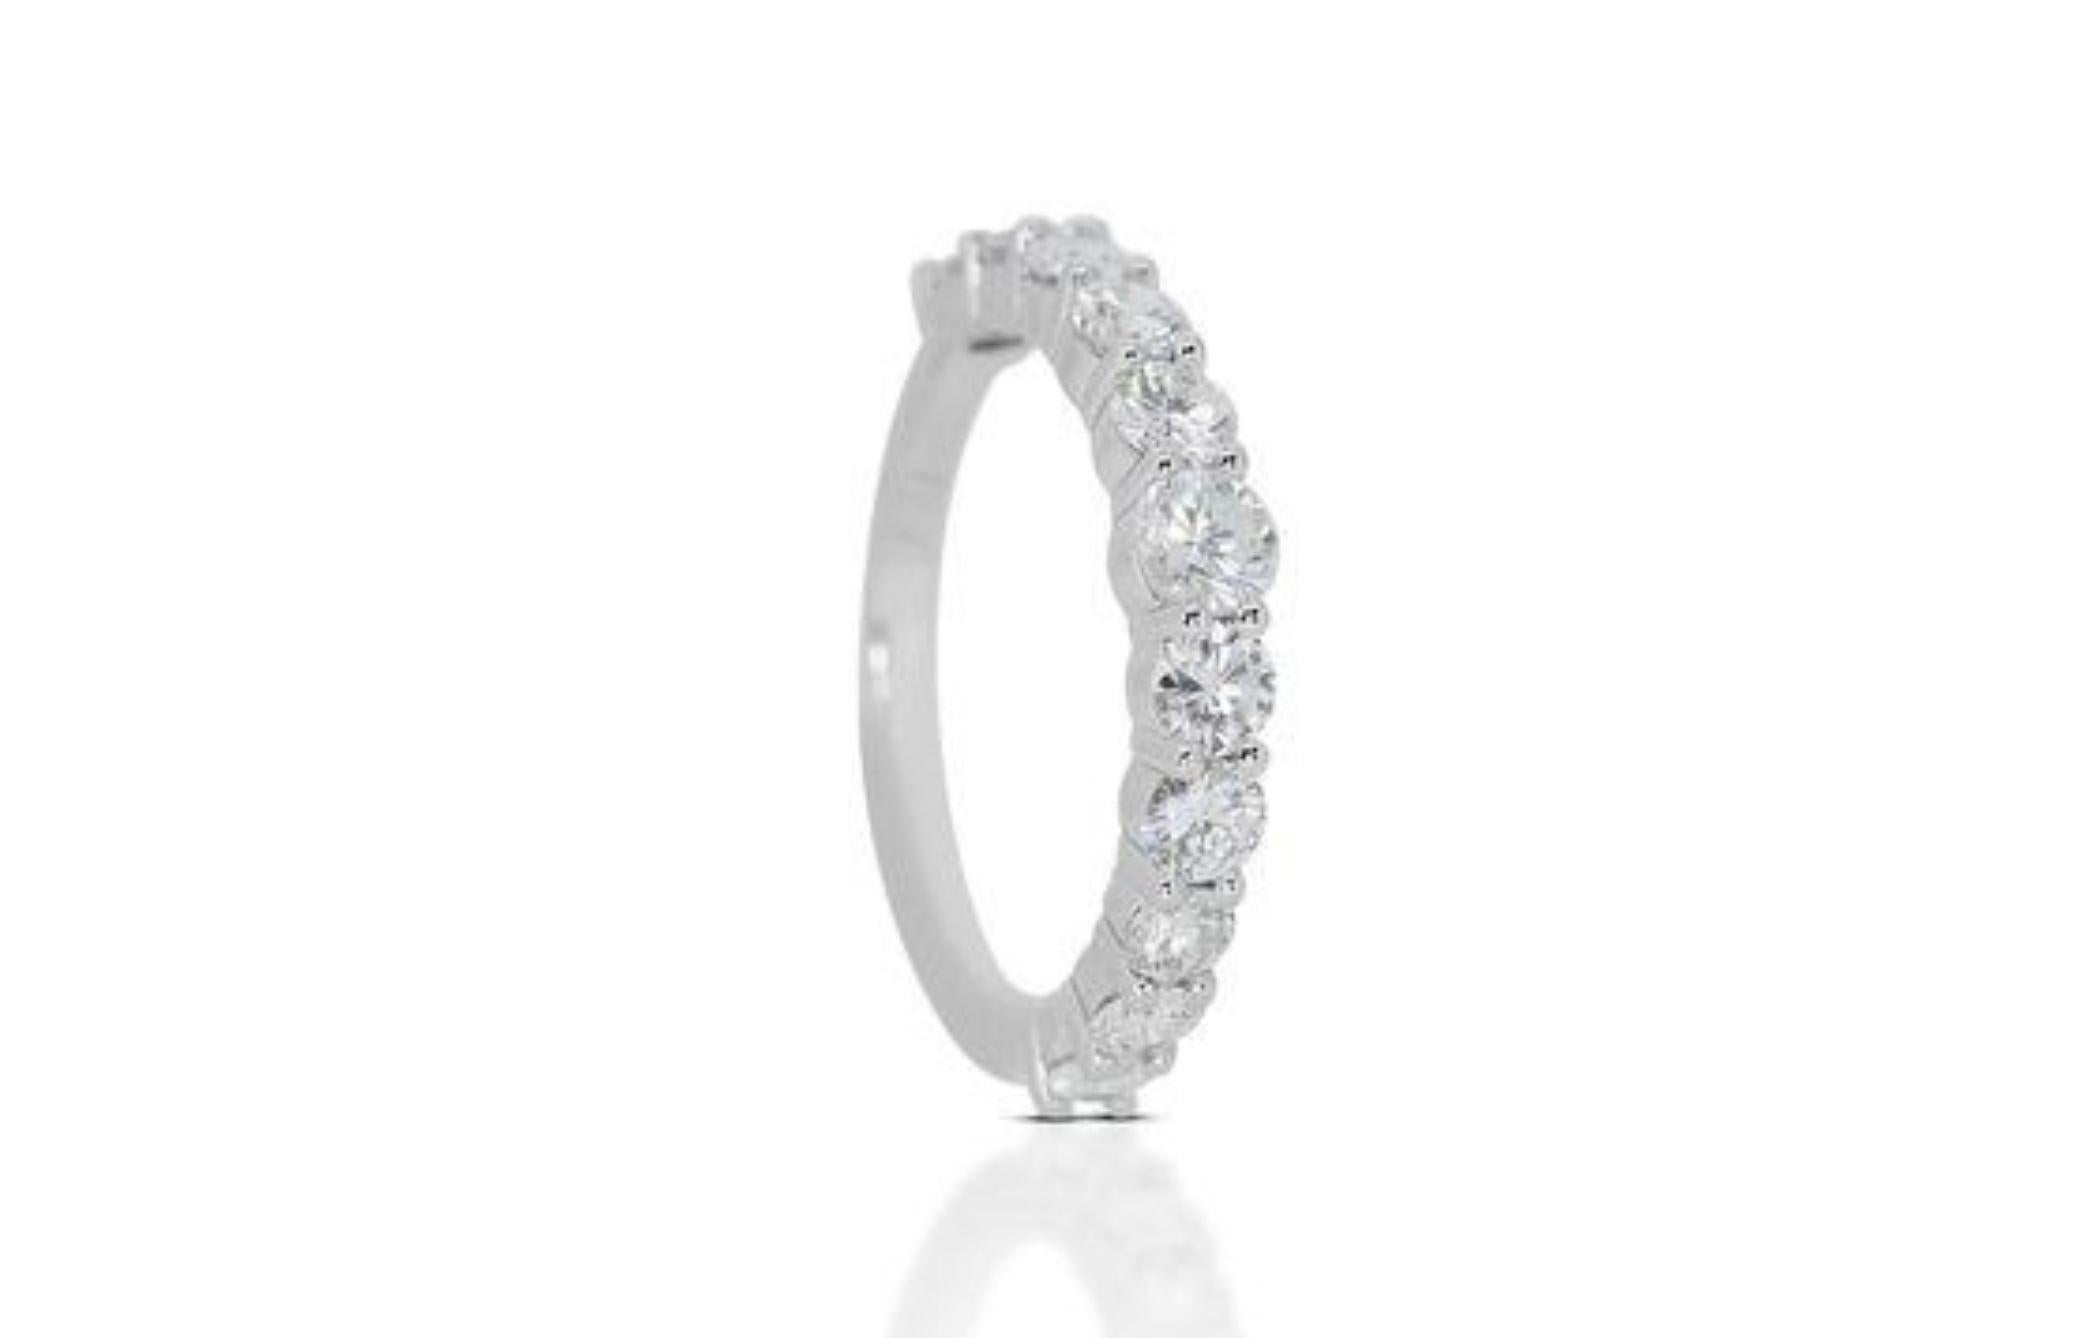 Stunning 1.58ct Round Brilliant Diamond Ring in 14k White Gold For Sale 1